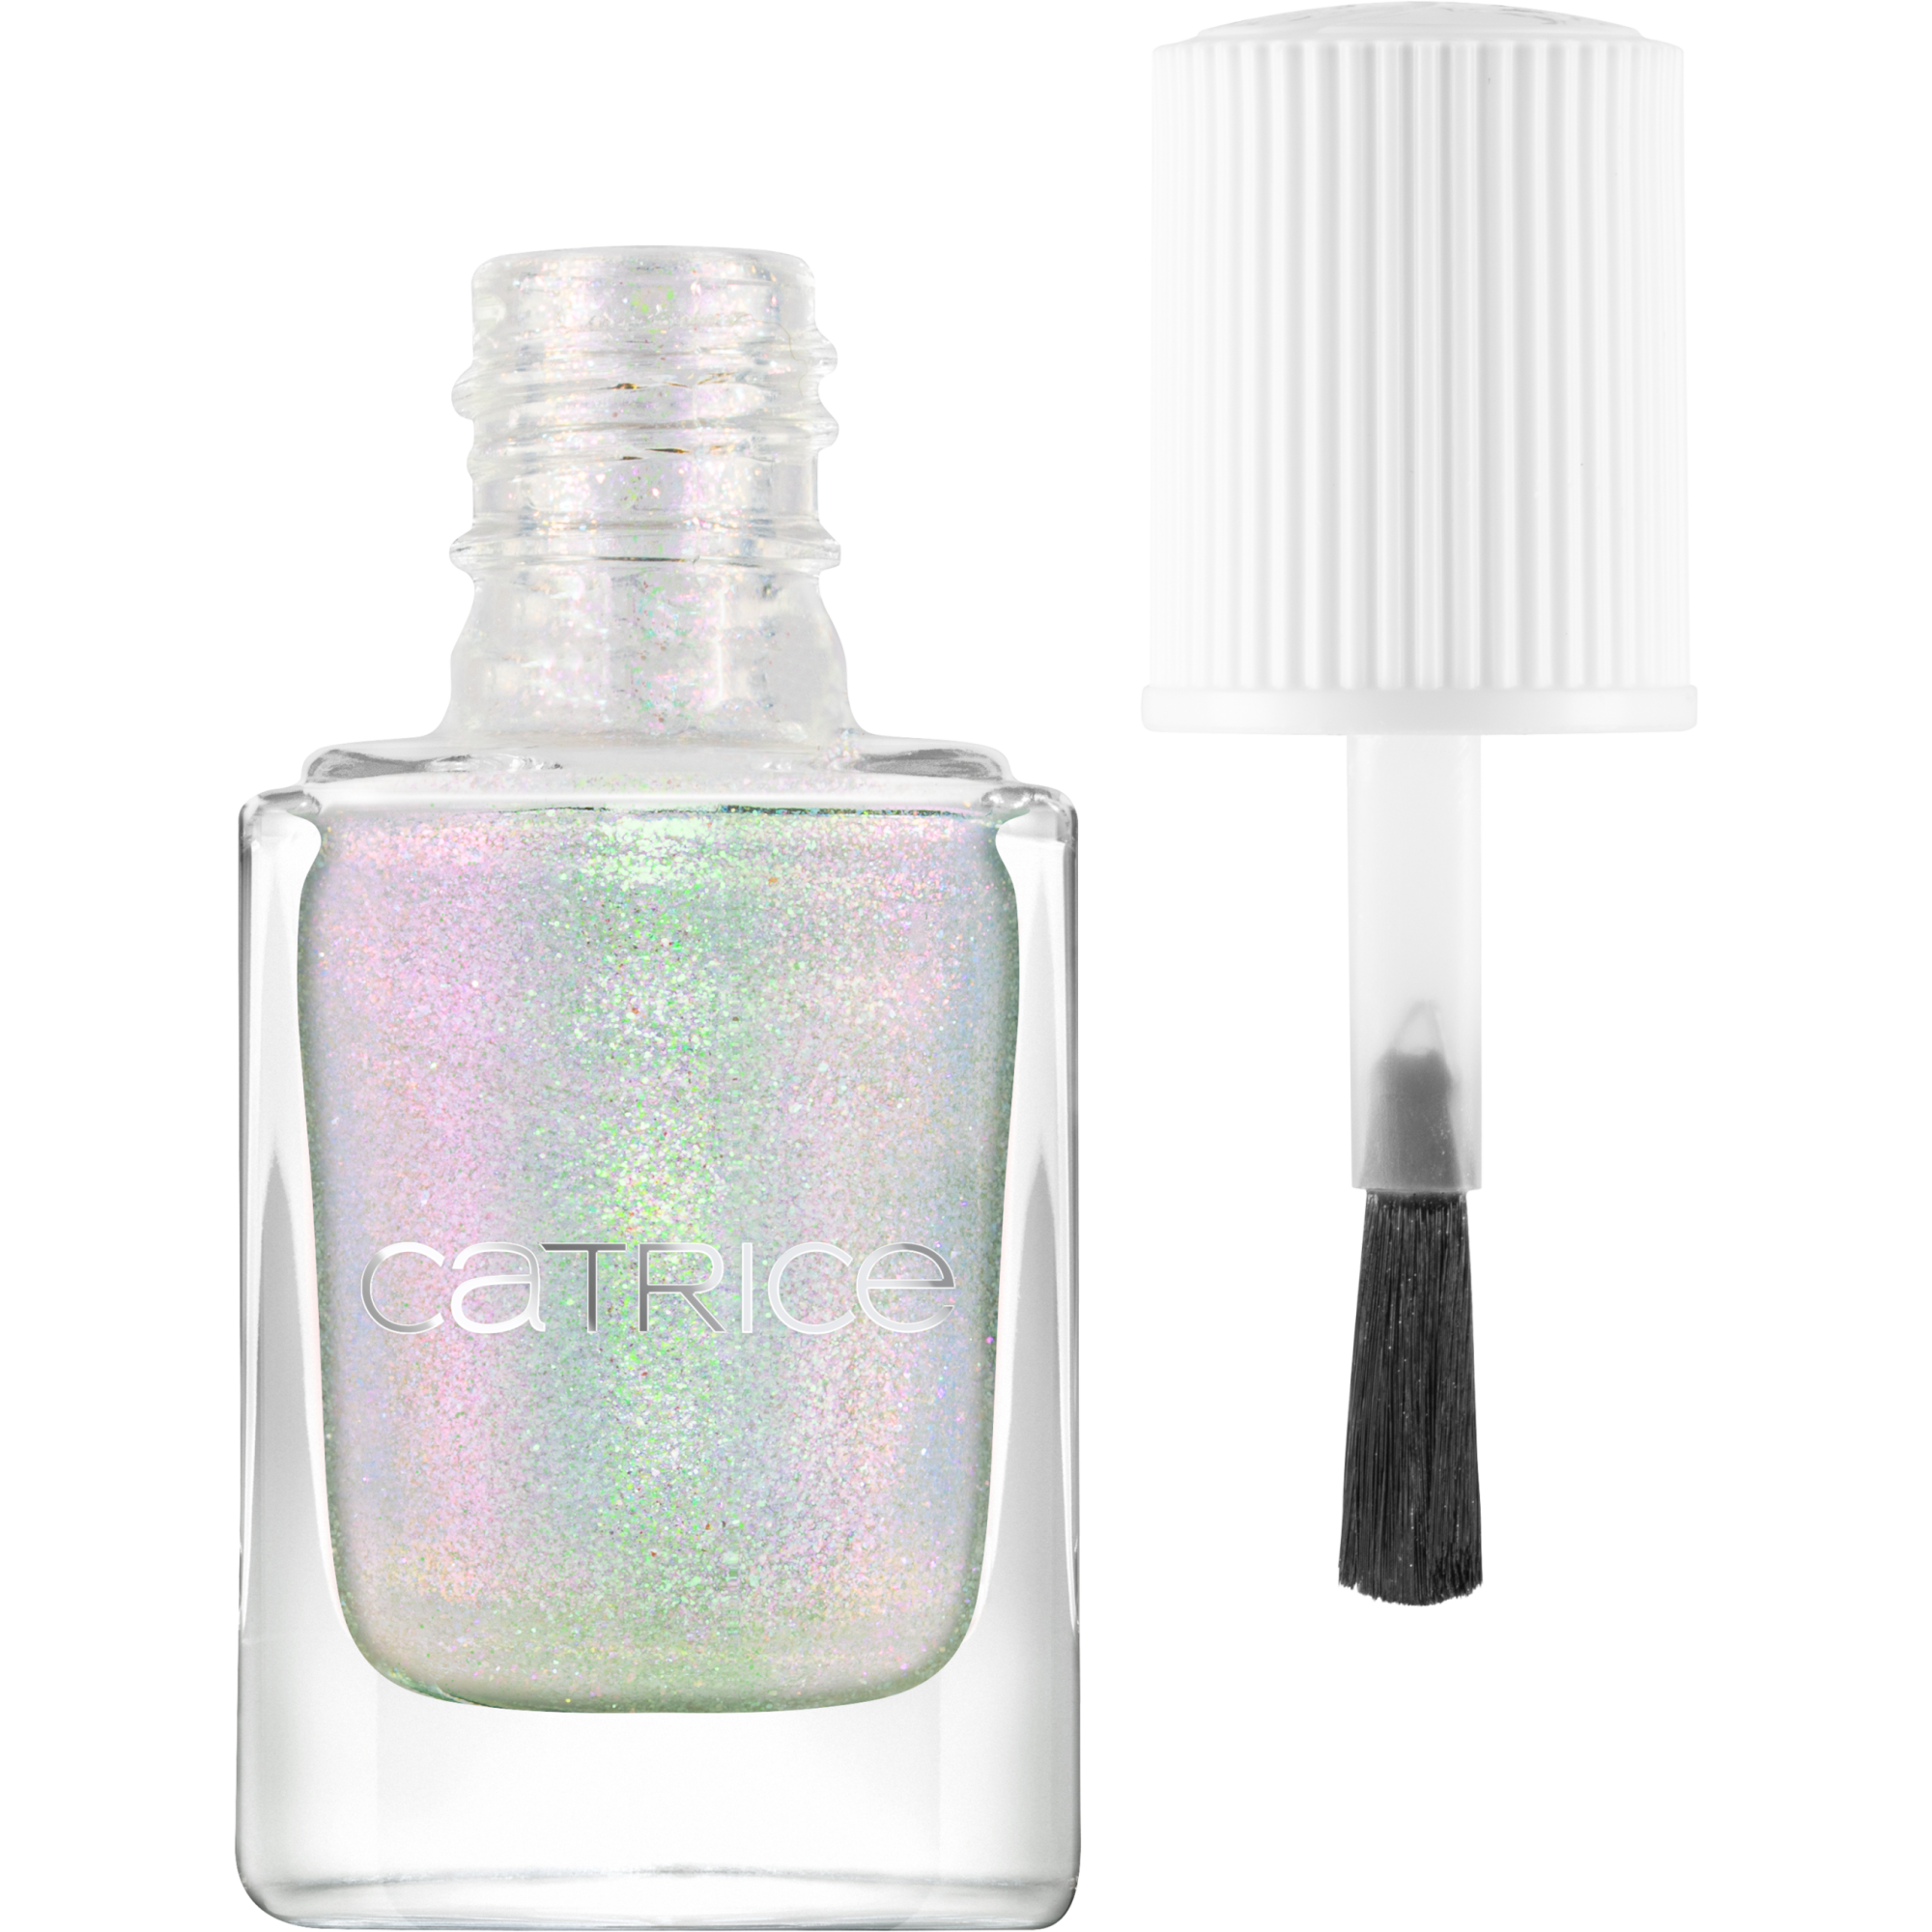 METAFACE Nail Lacquer